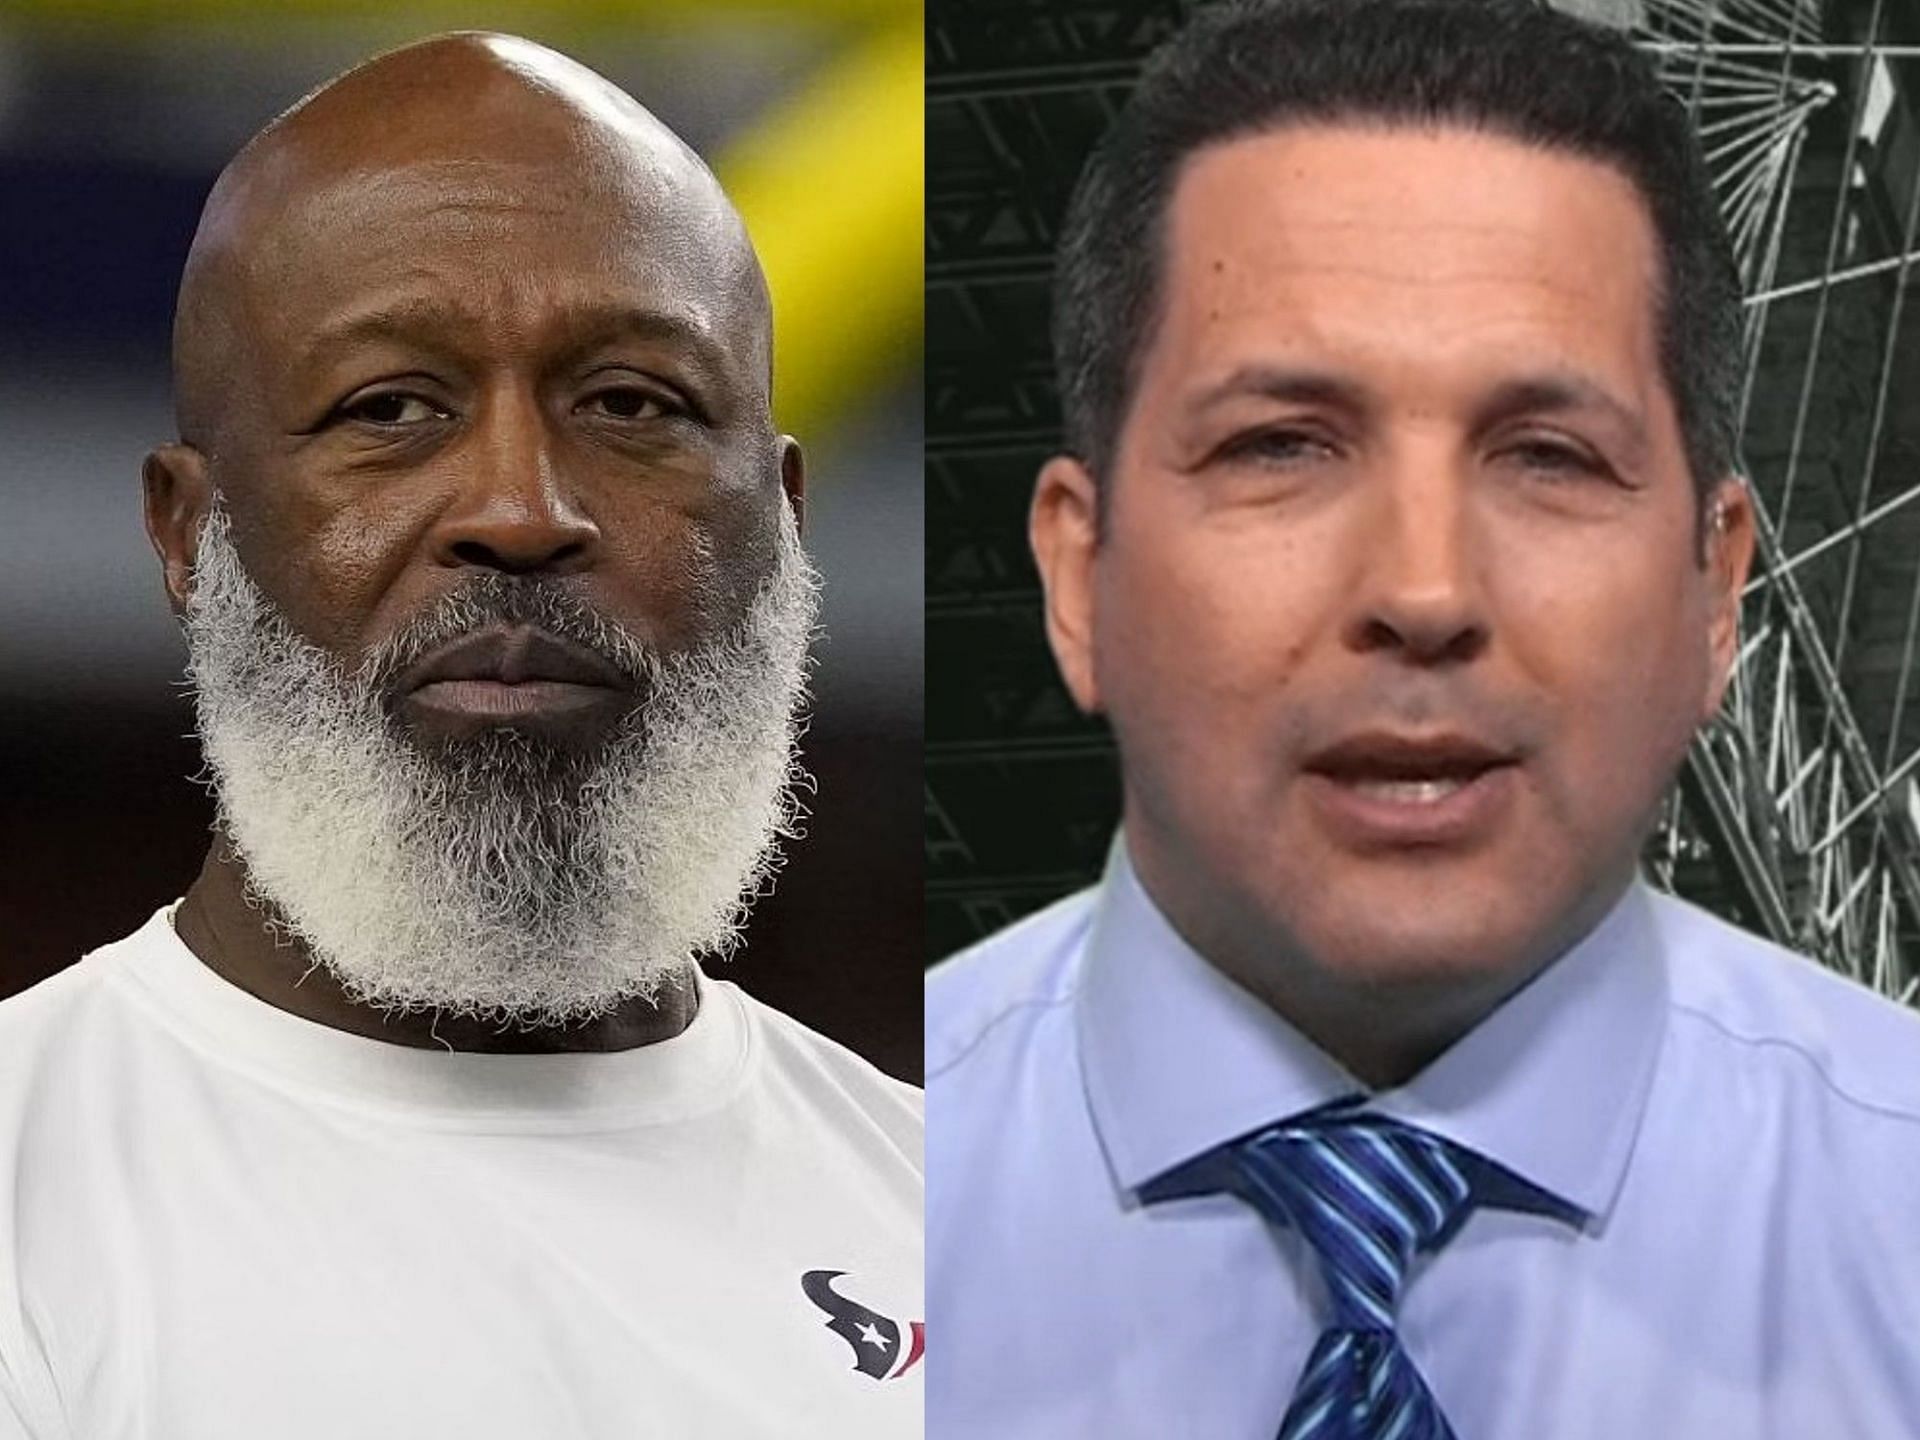 Adam Schefter claims Lovie Smith went rogue in win over Colts before firing - Courtesy of First Take on YouTube